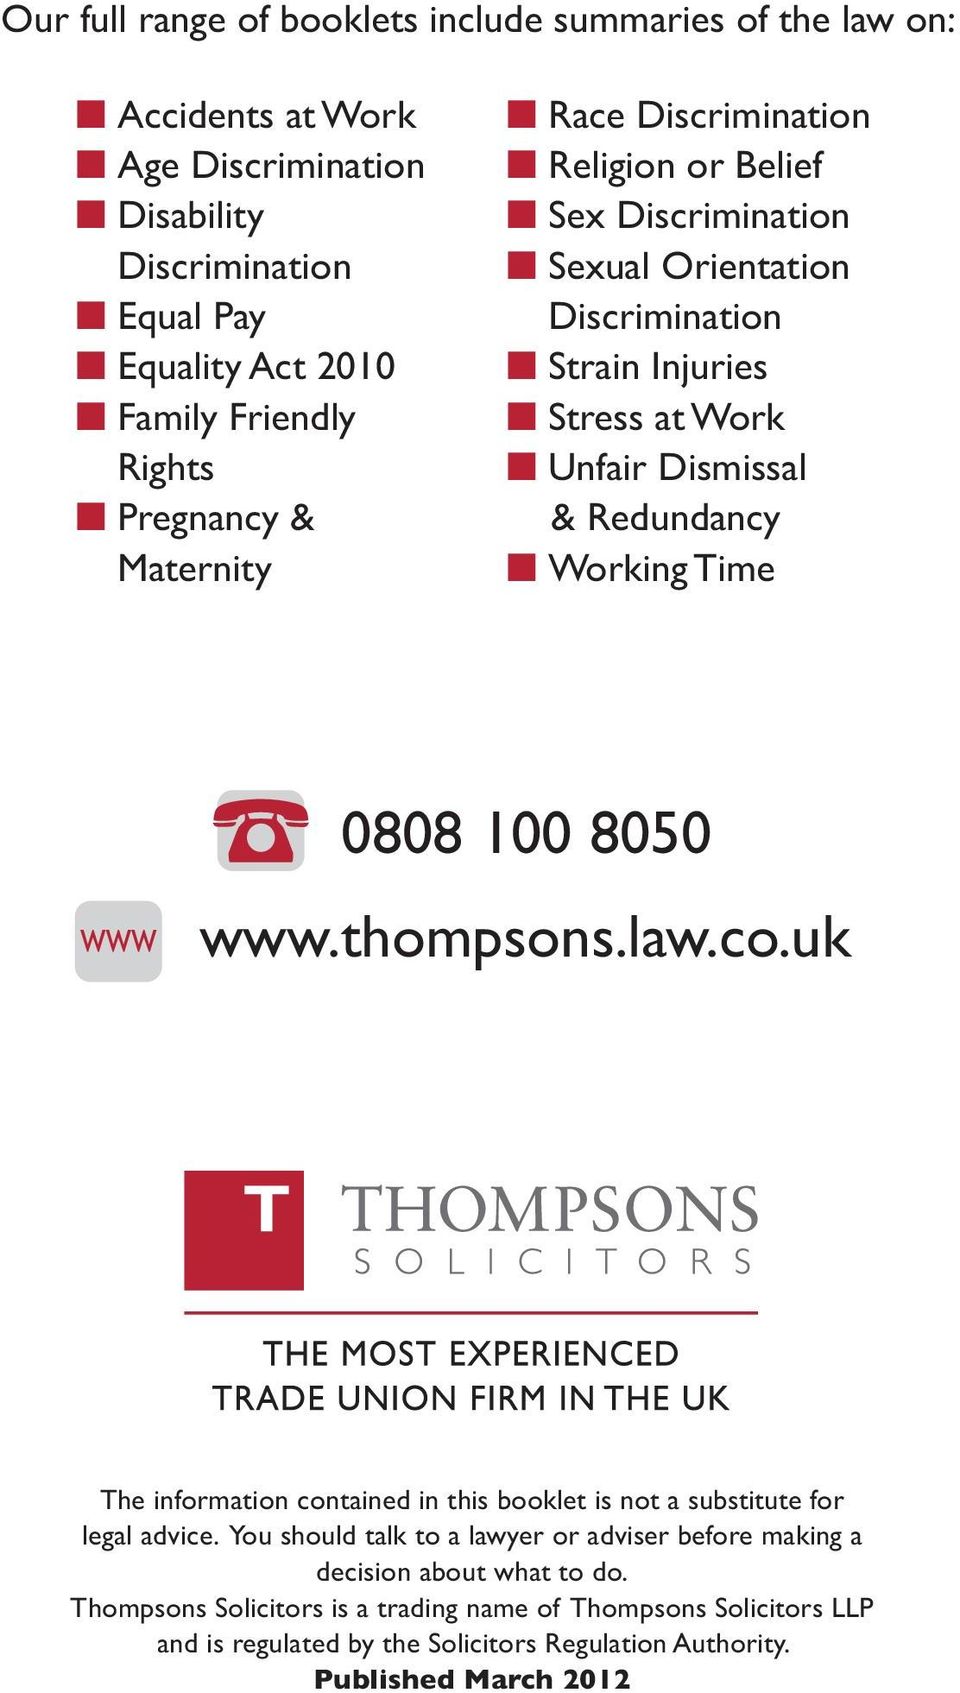 Working Time 0808 100 8050 www.thompsons.law.co.uk The information contained in this booklet is not a substitute for legal advice.